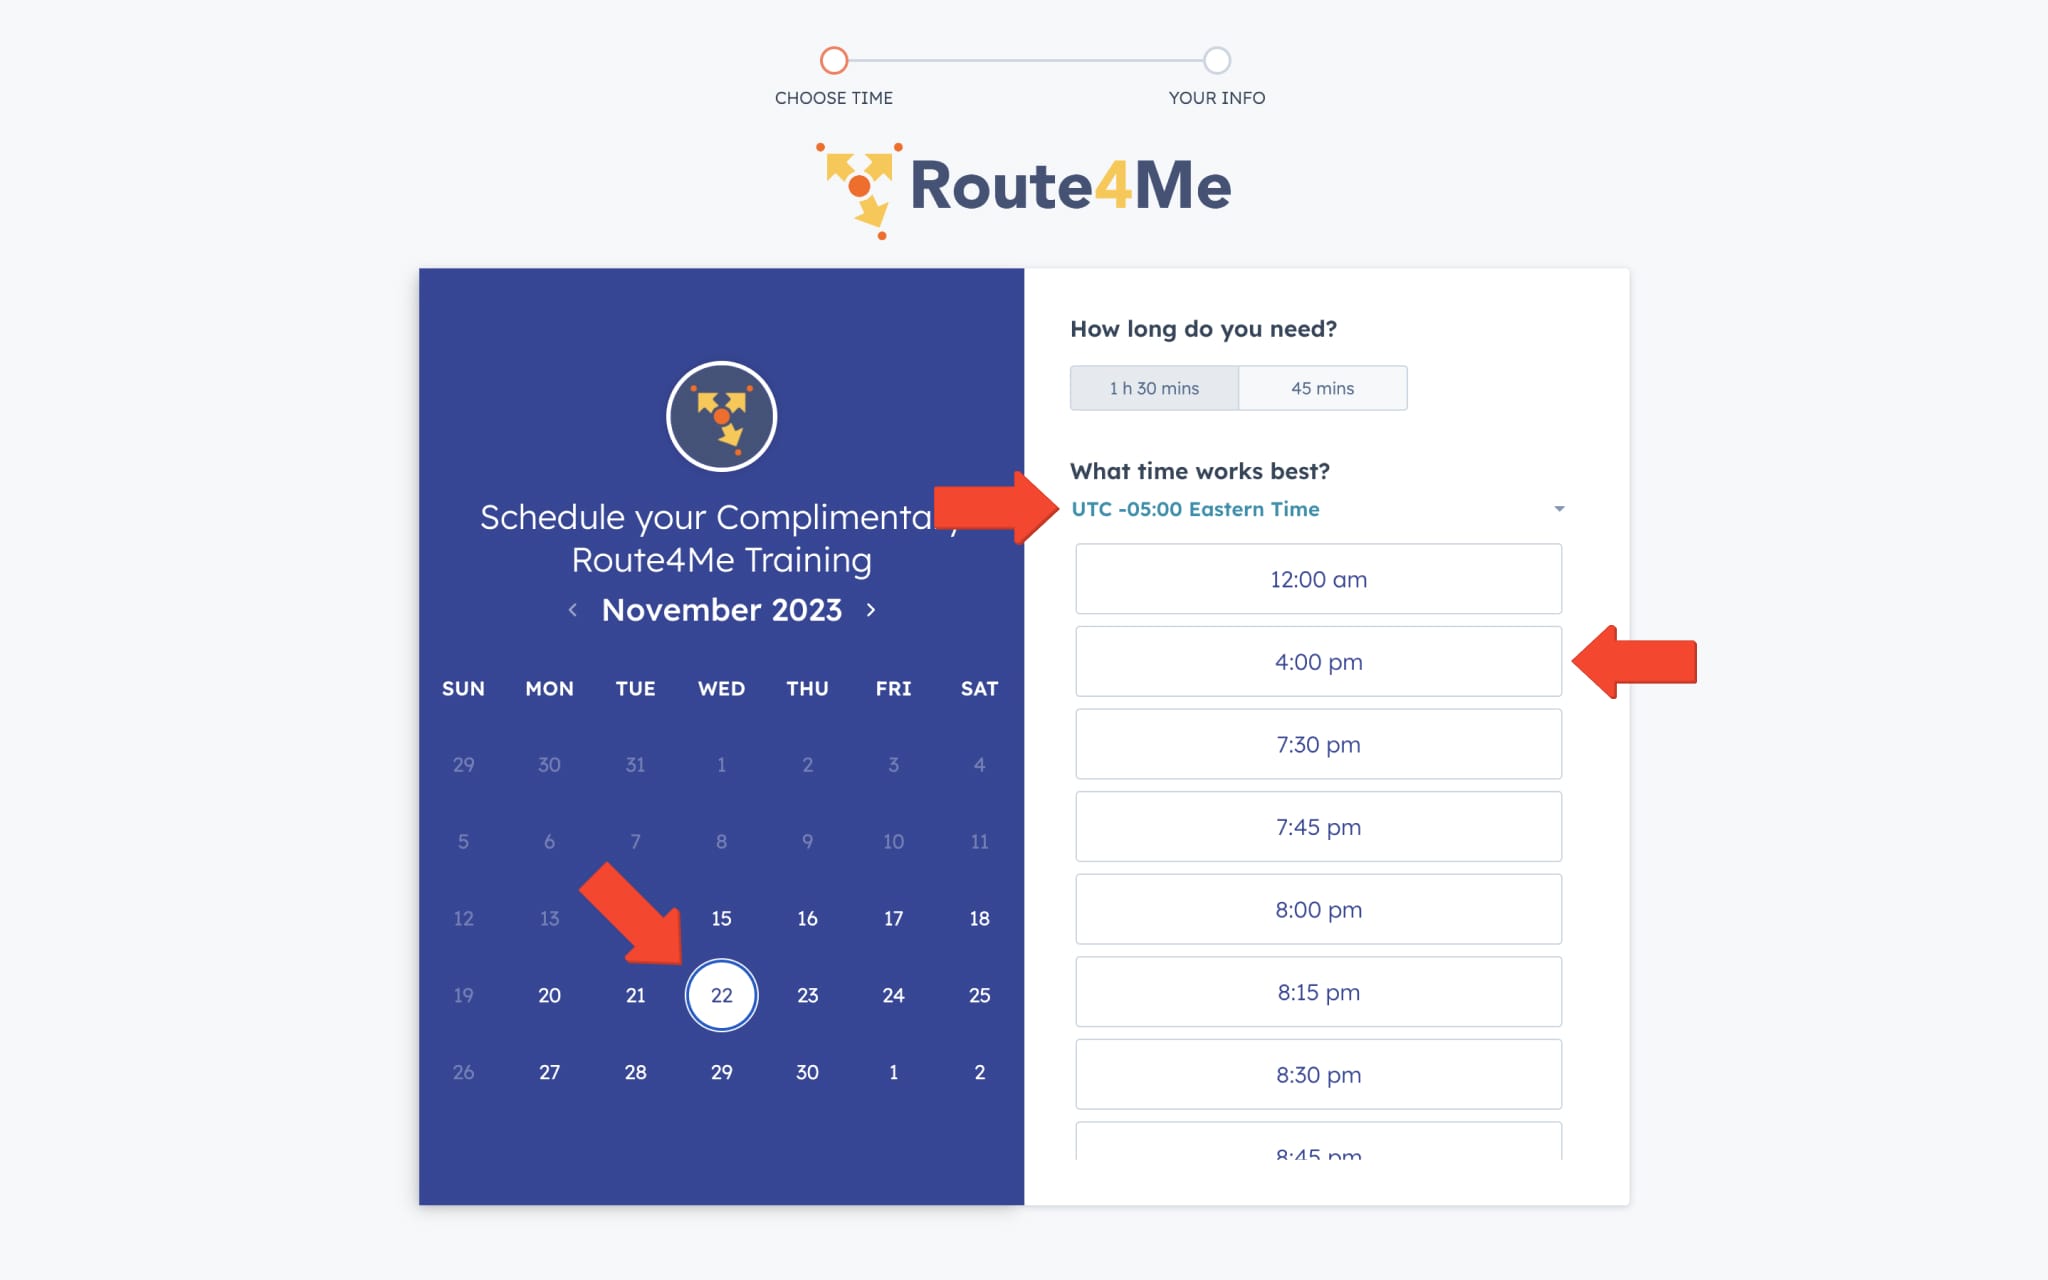 Select the preferred time zone, time, and date for your Route4Me Last Mile Optimization Software Onboarding and Training.